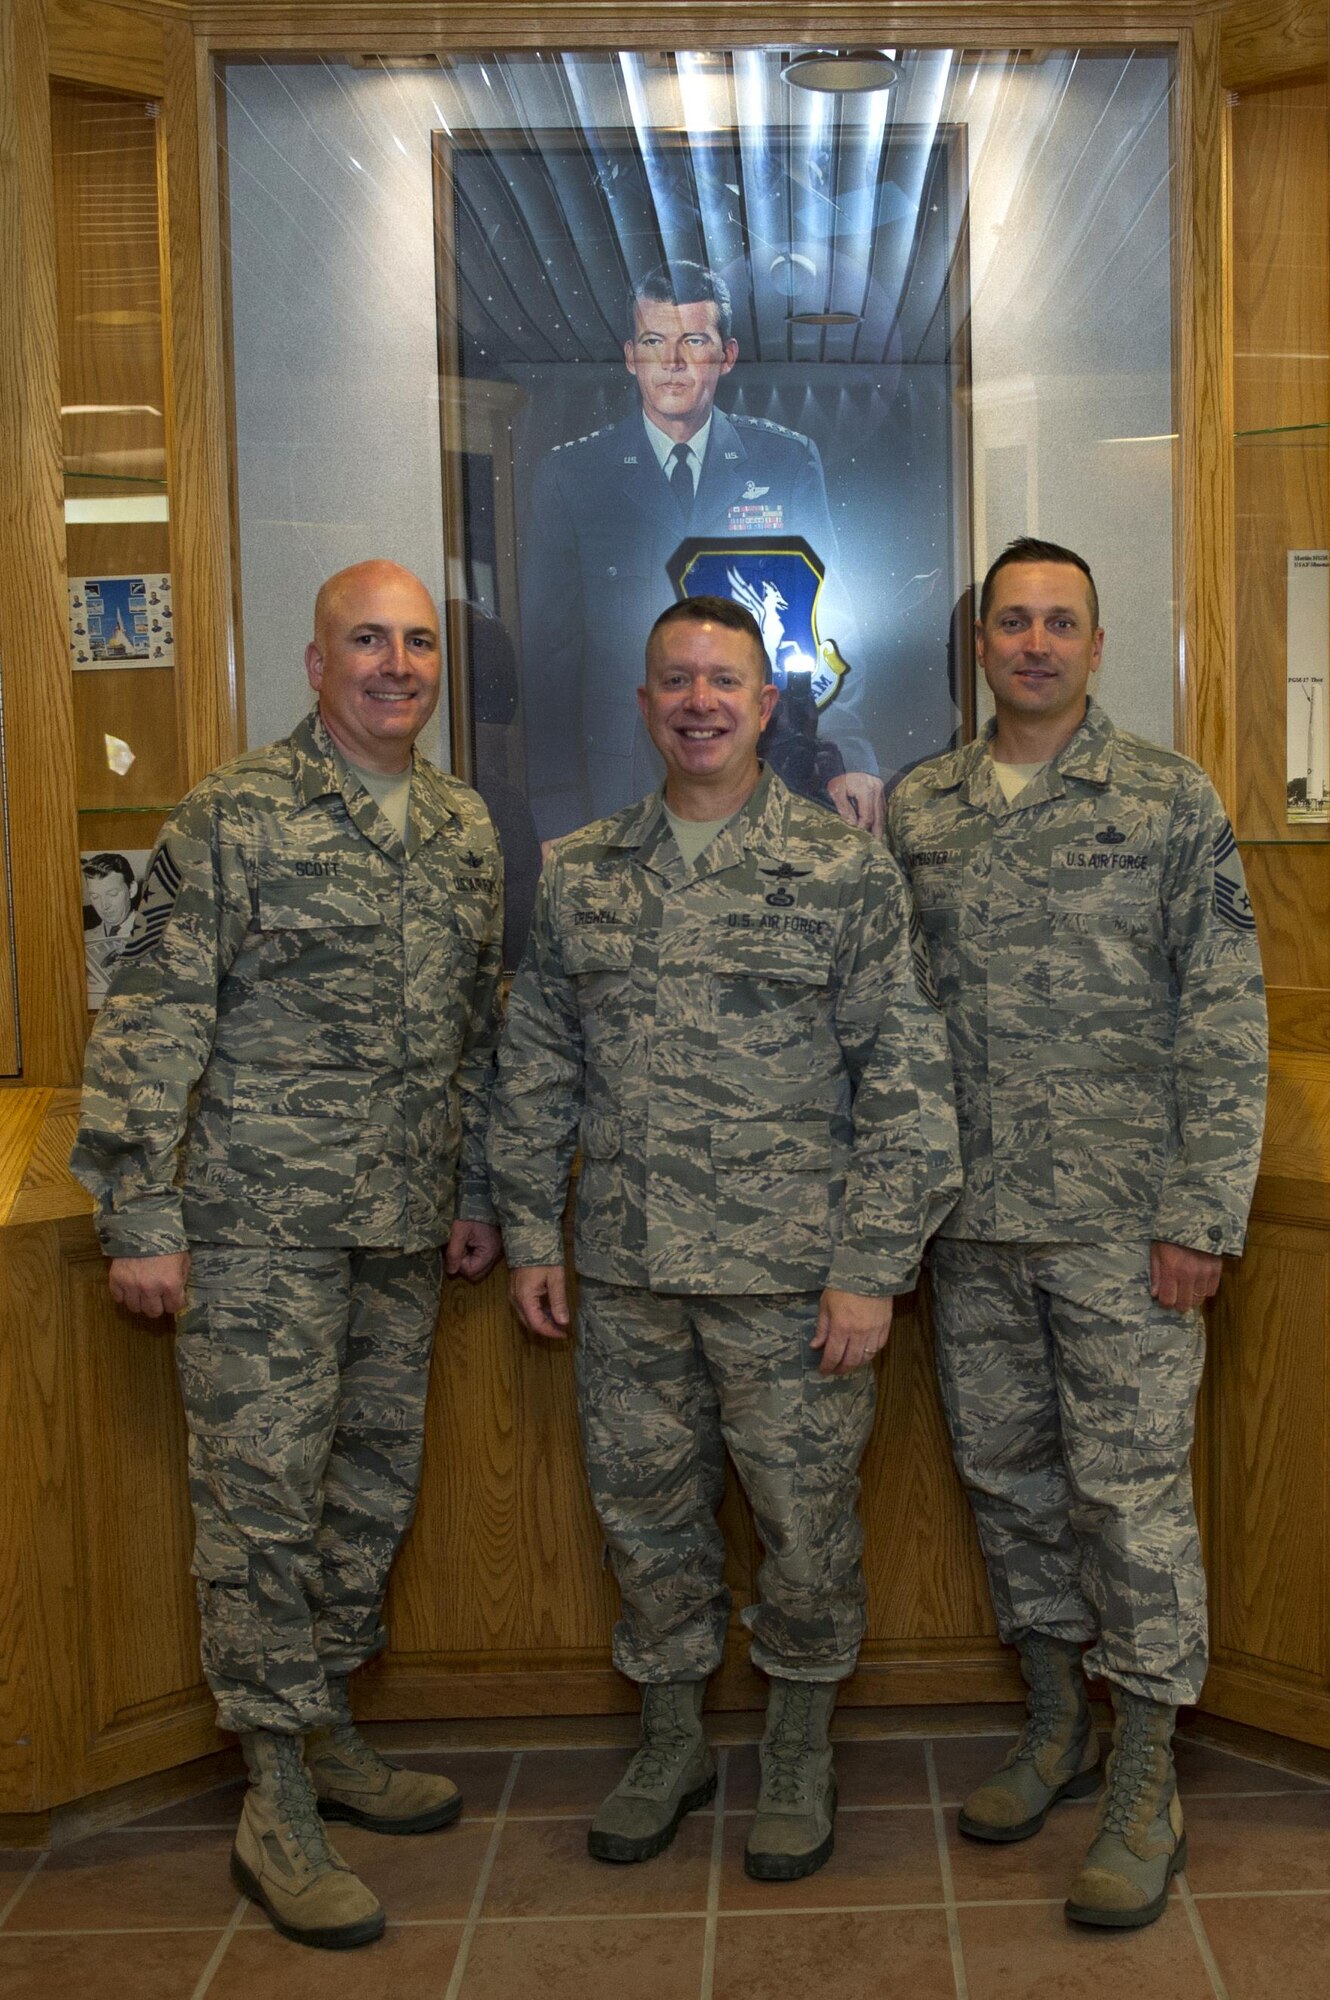 SCHRIEVER AIR FORCE BASE, Colo. -- Command Chief Master Sgt. Brendan Criswell and Individual Mobilization Augmentee Chief Master Sgt. James Burmeister, Air Force Space Command, accompany Command Chief Master Sgt. Todd Scott, 310th Space Wing, while posing for a group photo during the June Unit Training Assembly on Sunday, June 4th, 2017. The command chiefs were given a tour of squadrons within the wing to see how Citizen Airmen contribute to the daily Air Force mission. (U.S. Air Force photo/Staff Sgt. Christopher Moore)